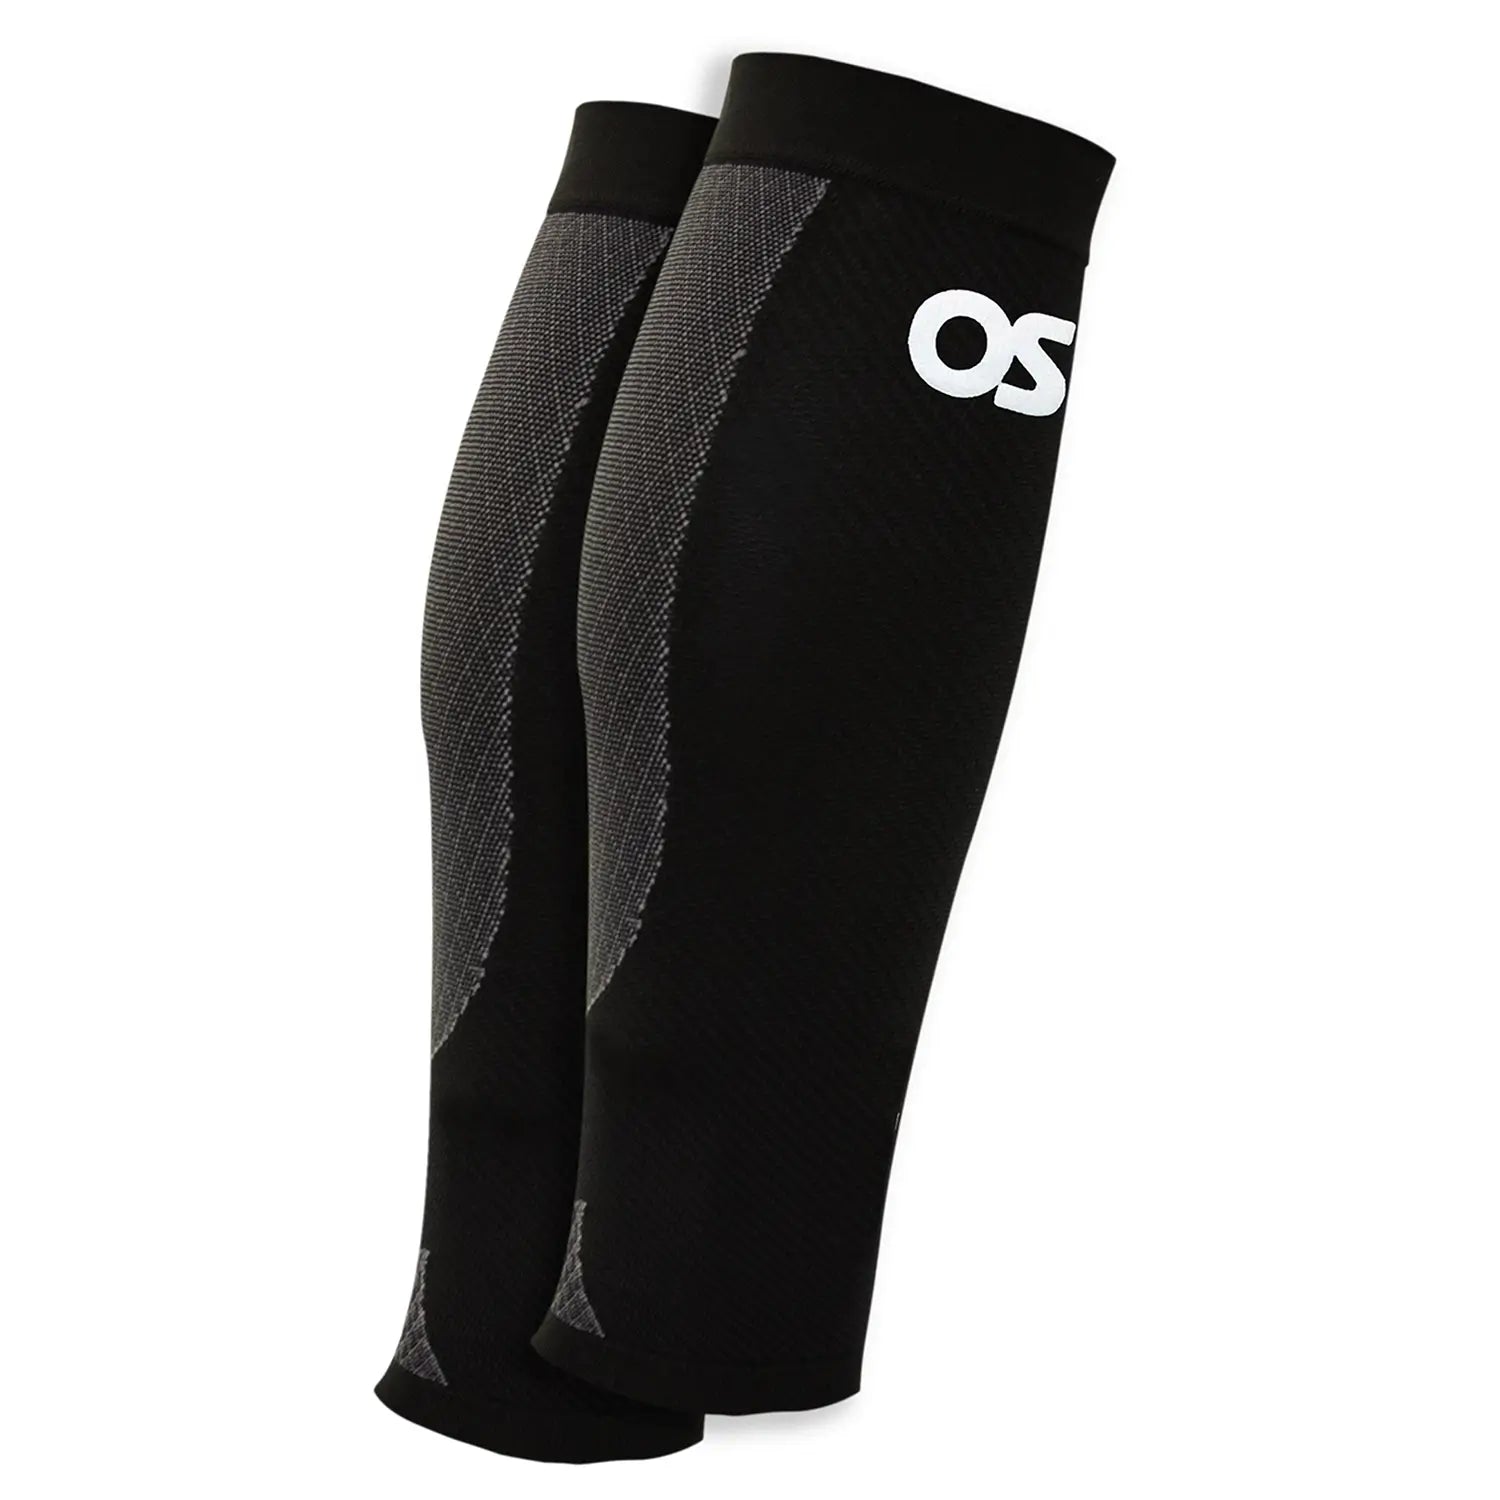 CS6 Calf Compression Sleeves For Lower Leg Pain & Swelling – My Foot Guy